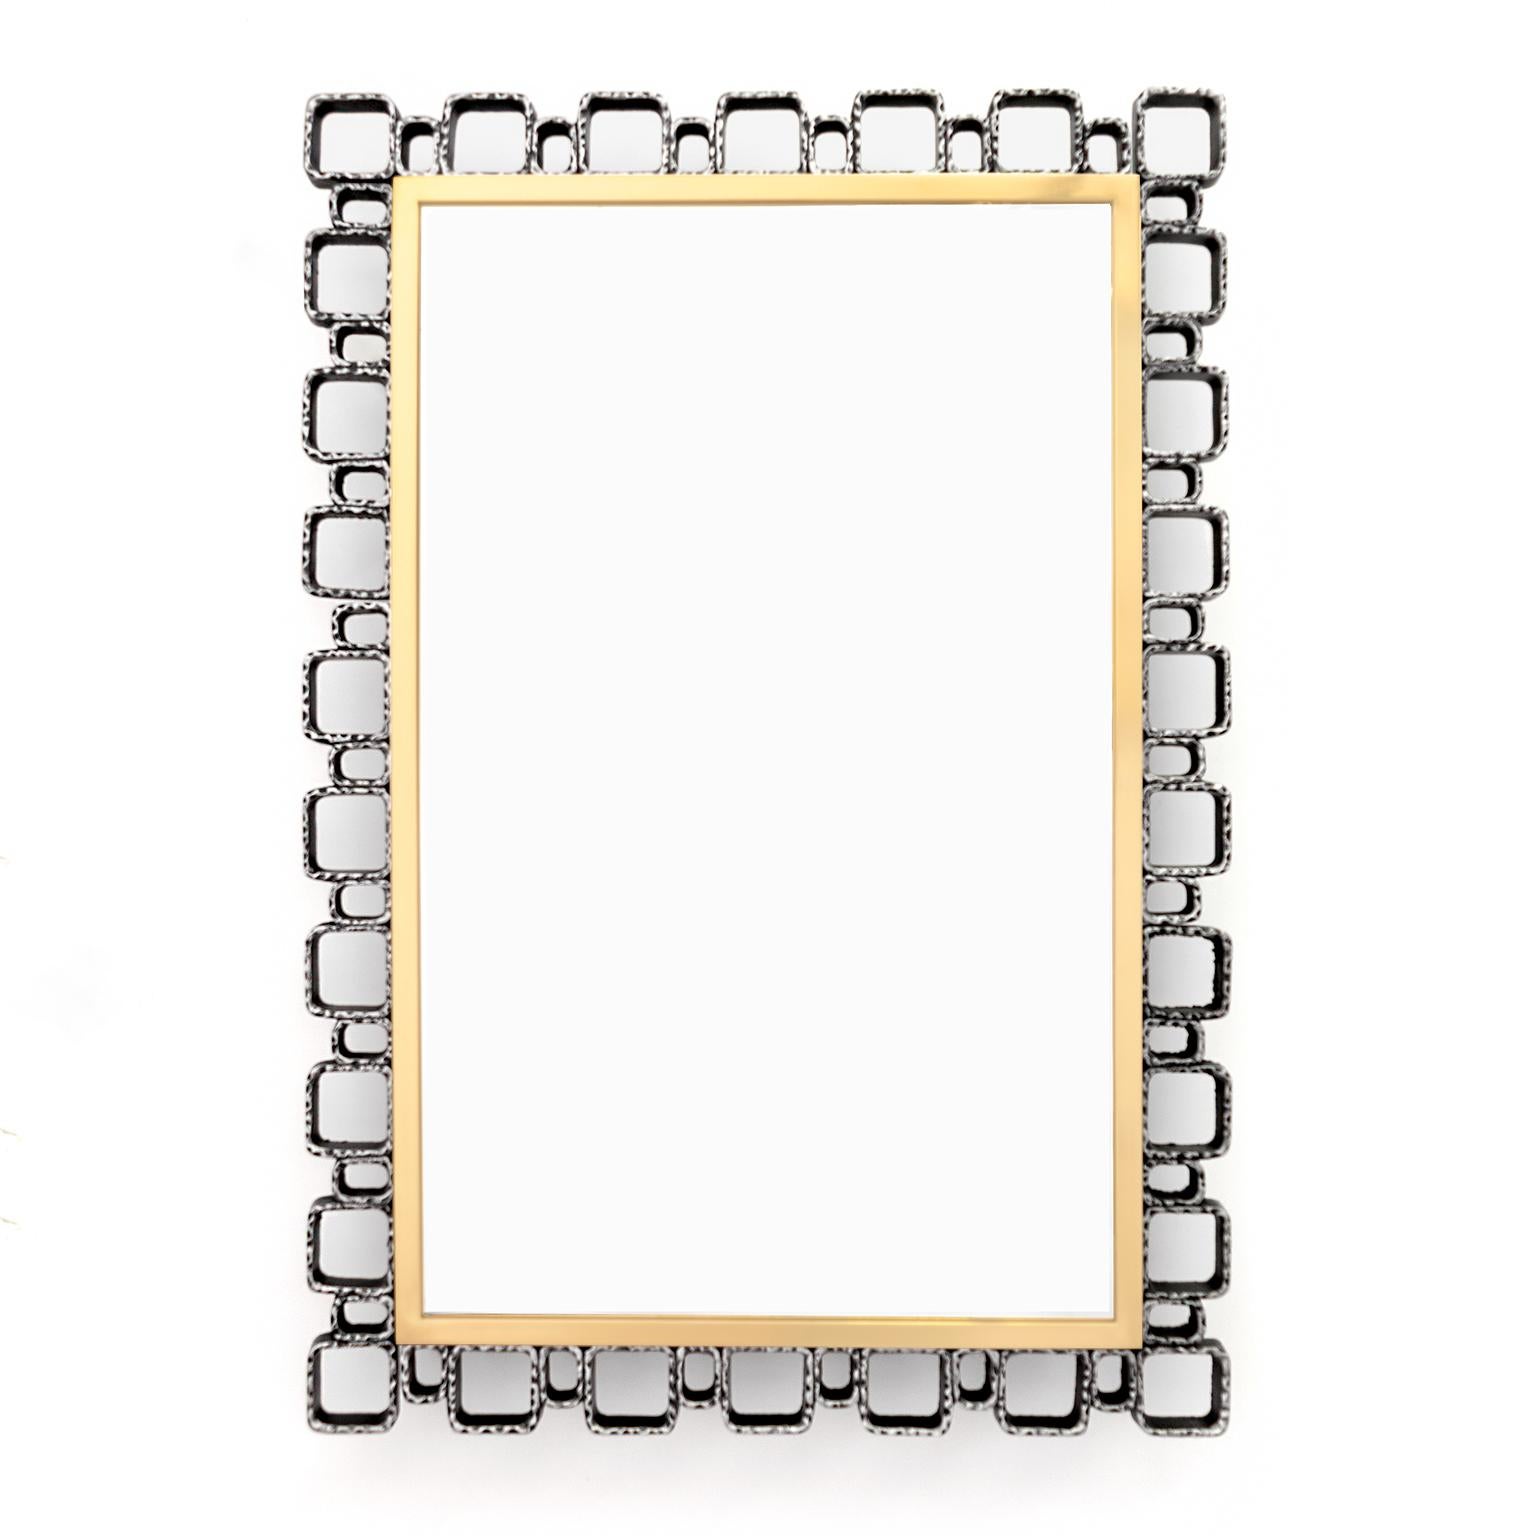 European Mid-Century Modern wall mirror with built in lights. The mirror’s frame is constructed of cast metal elements in the “Brutalist” aesthetic which surrounds a polished and lacquered brass inner frame. Newly restored, cleaned and polished,